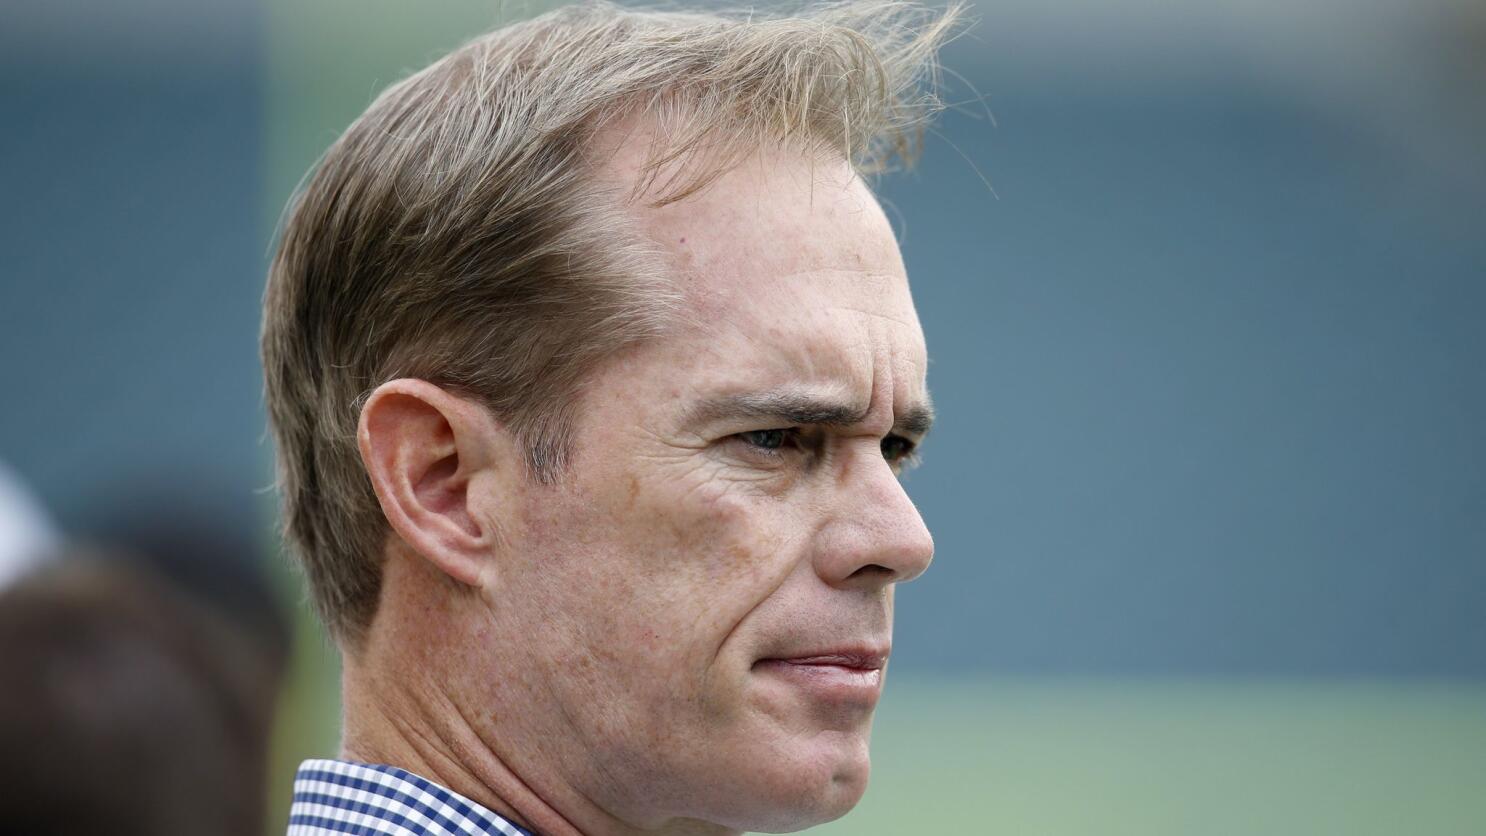 Relax Dodger fans, Joe Buck is not the problem - Los Angeles Times